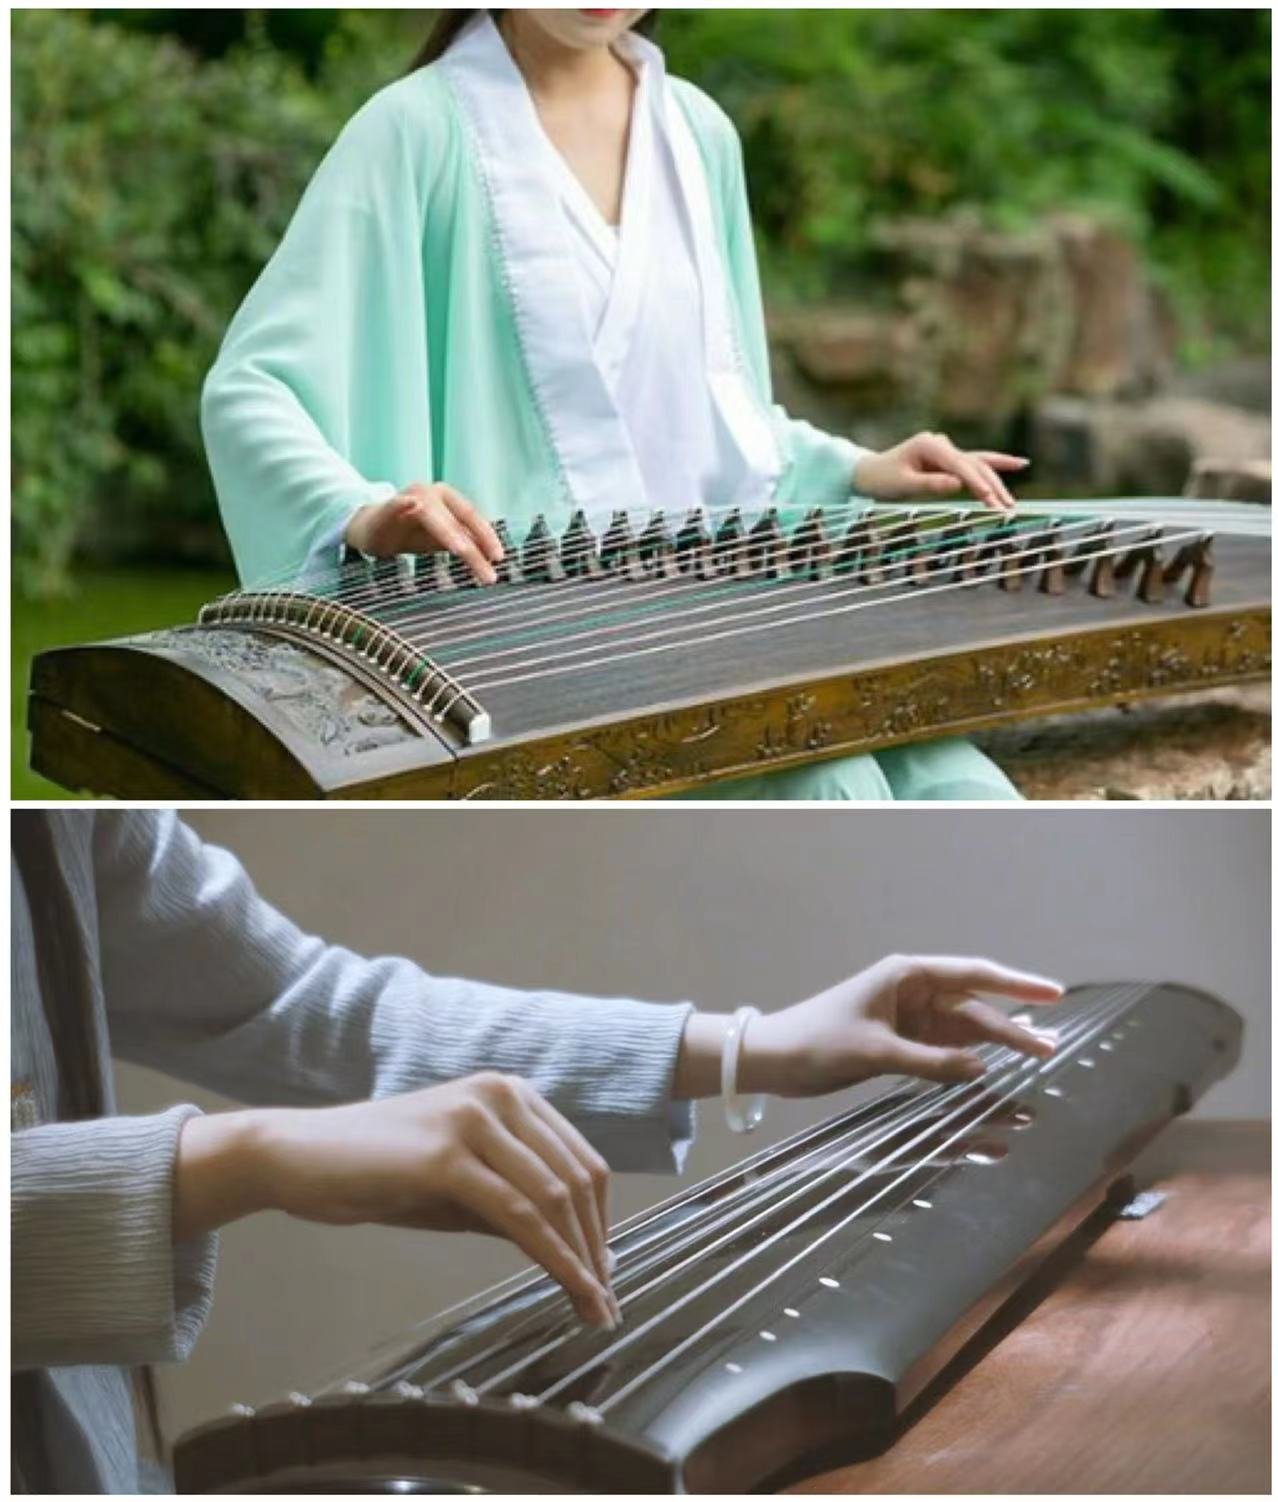 Ashley Huang's top inspirations in China: The 古筝 [Gǔzhēng] and 古琴 [gǔqín] traditional Chinese instruments.